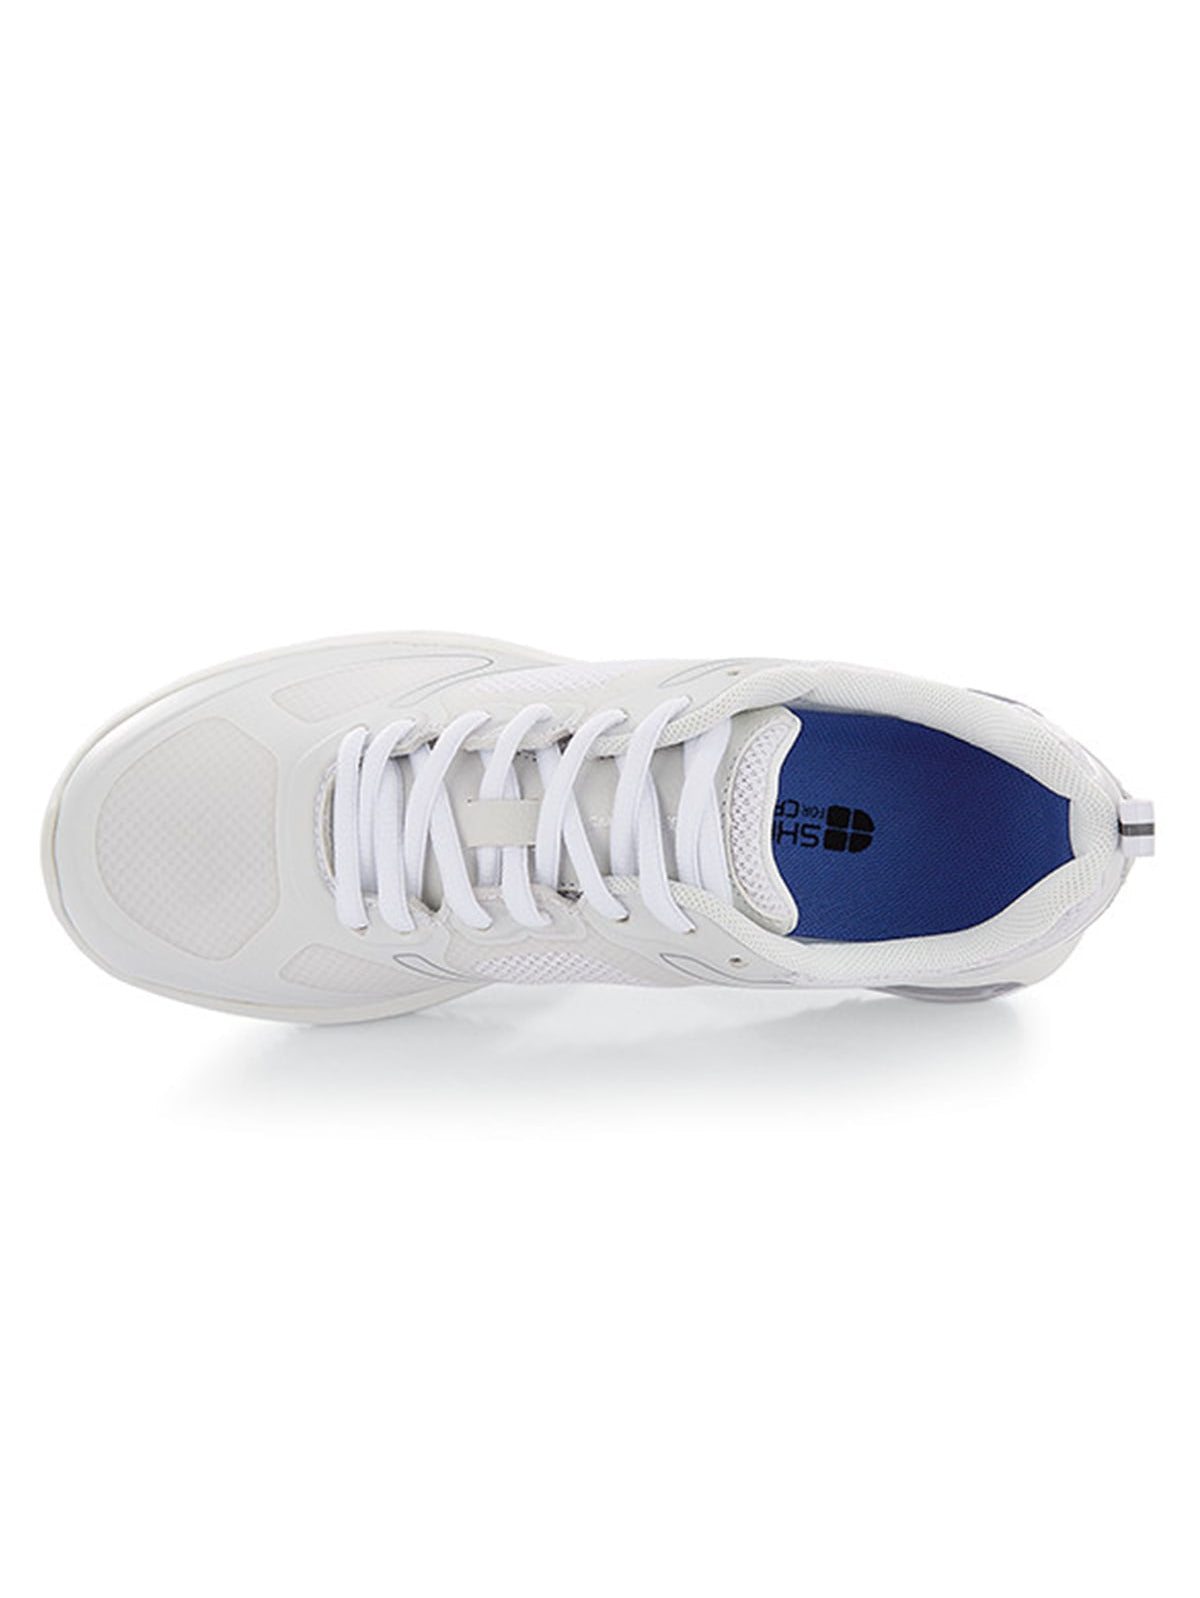 Men's Work Shoe Evolution Ii White by  Shoes For Crews.